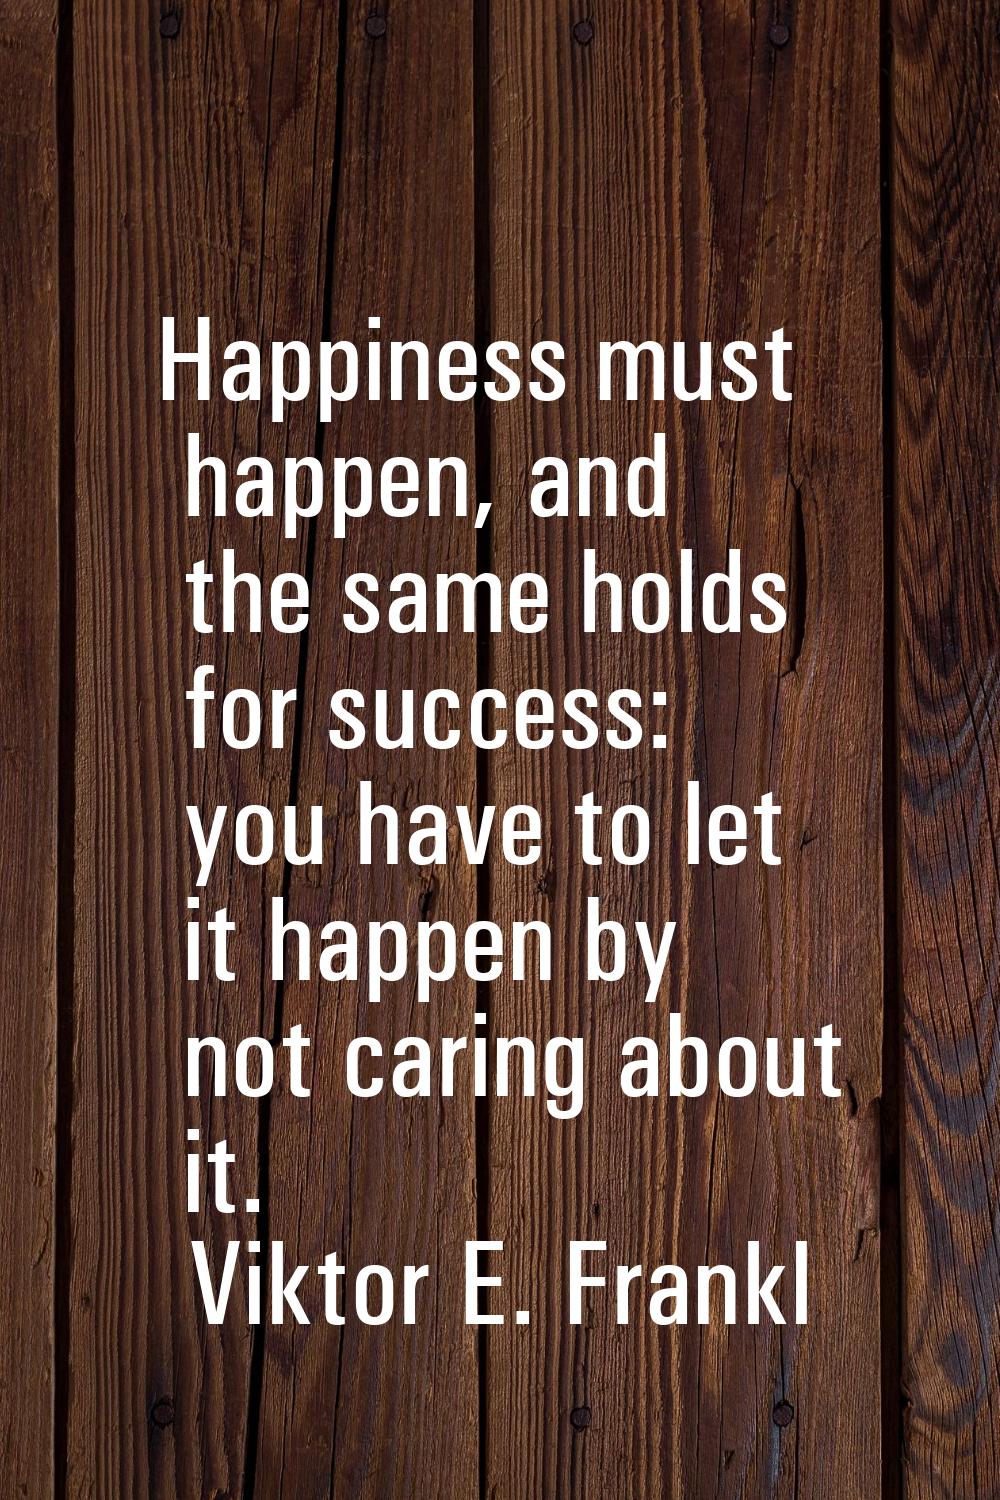 Happiness must happen, and the same holds for success: you have to let it happen by not caring abou